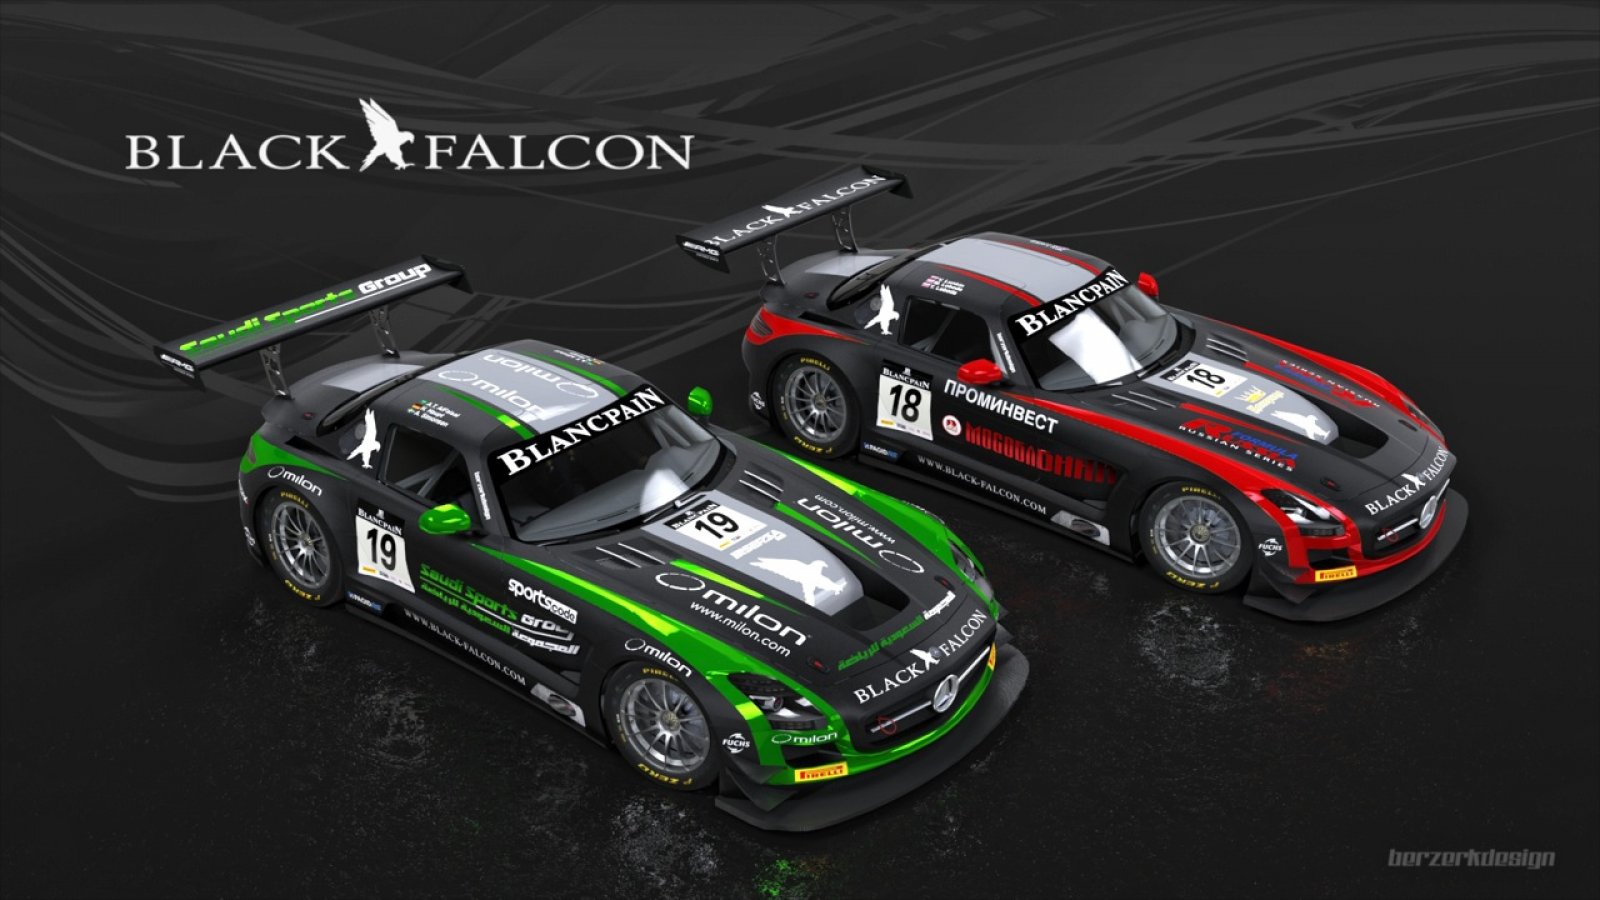 New Challenges for Team Black Falcon in 2014